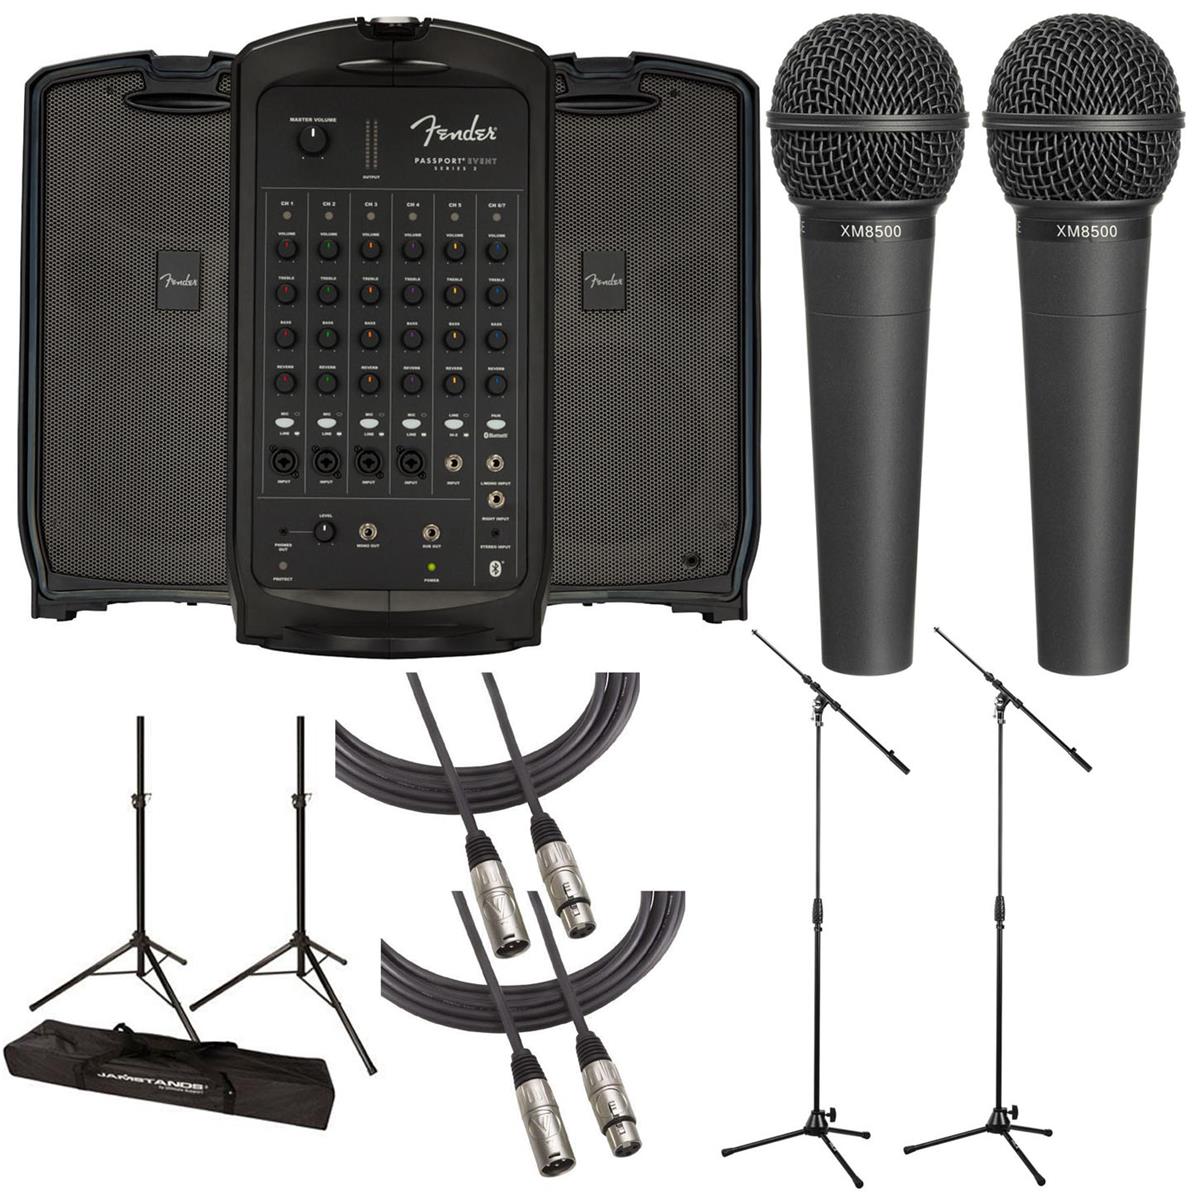 Fender Passport Event Series 2 375W 7-CH PA System with 2x Stands, Mic, Cable -  6943000000 C